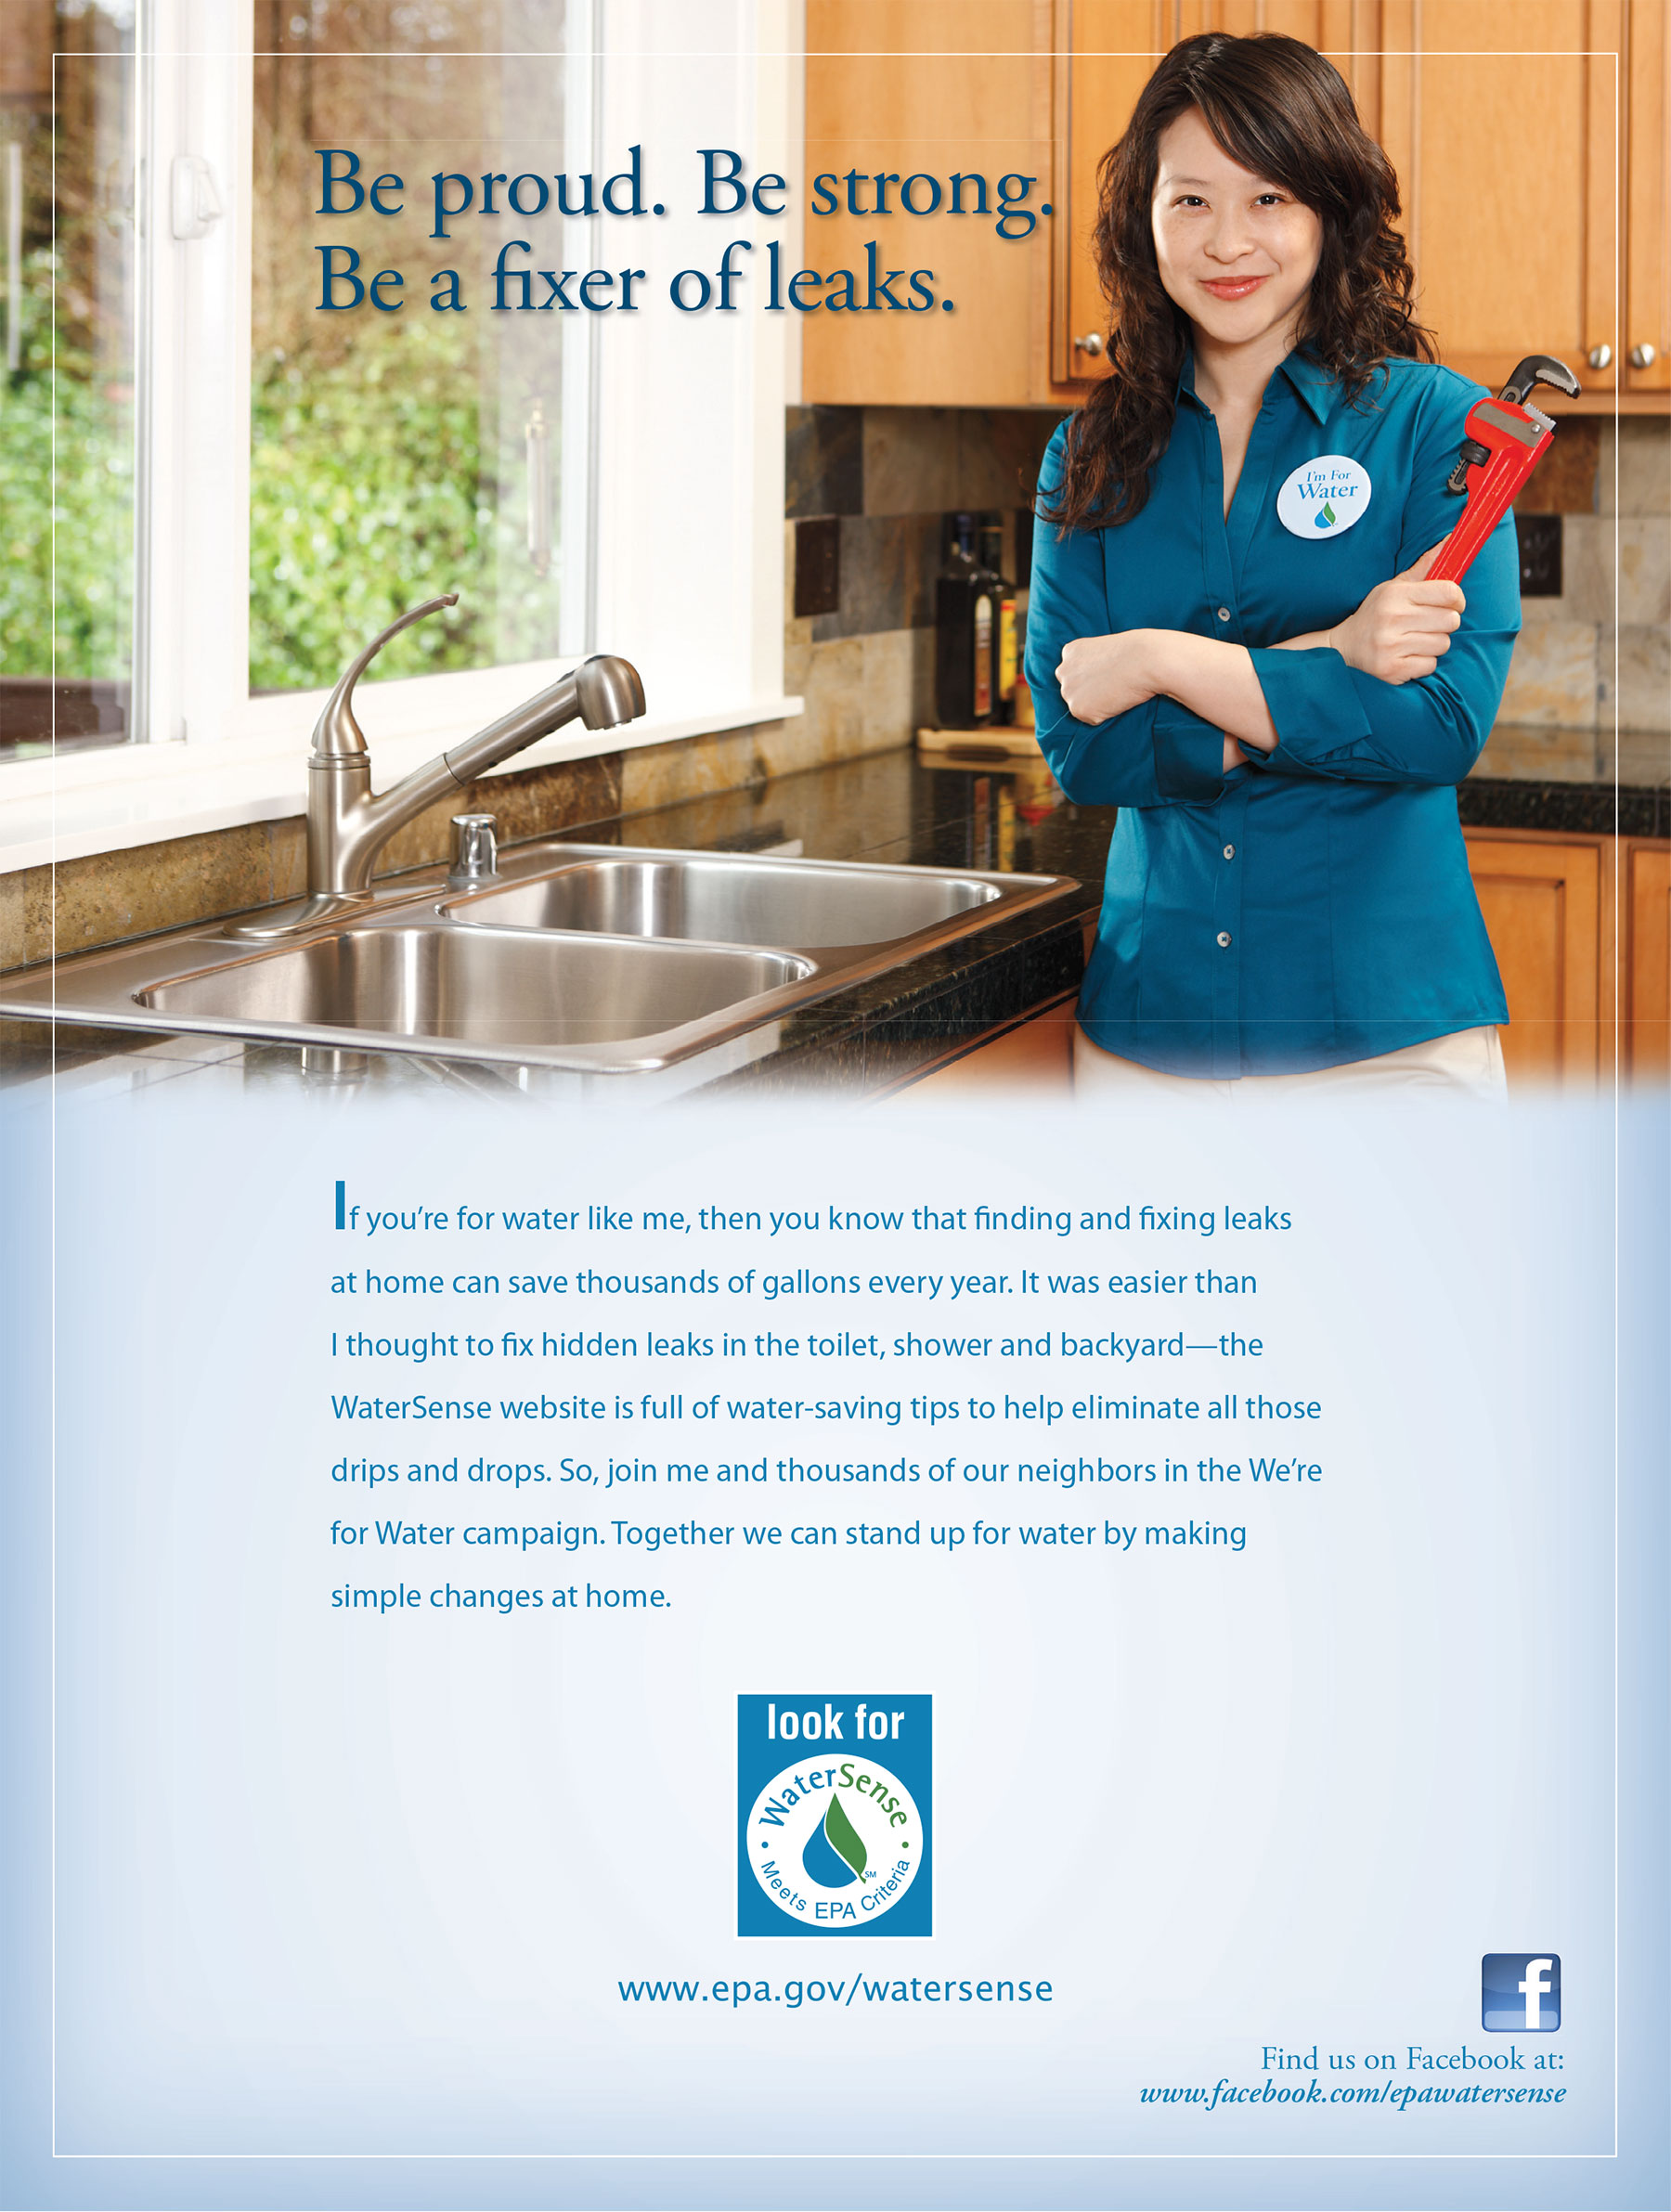 Be proud. Be strong. Be a fixer of leaks. If you’re for water like me, then you know that finding and fixing leaks at home can save thousands of gallons every year. It was easier than I thought to fix hidden leaks in the toilet, shower and backyard—the WaterSense website is full of water-saving tips to help eliminate all those drips and drops. So, join me and thousands of our neighbors in the We’re for Water campaign. Together we can stand up for water by making simple changes at home.